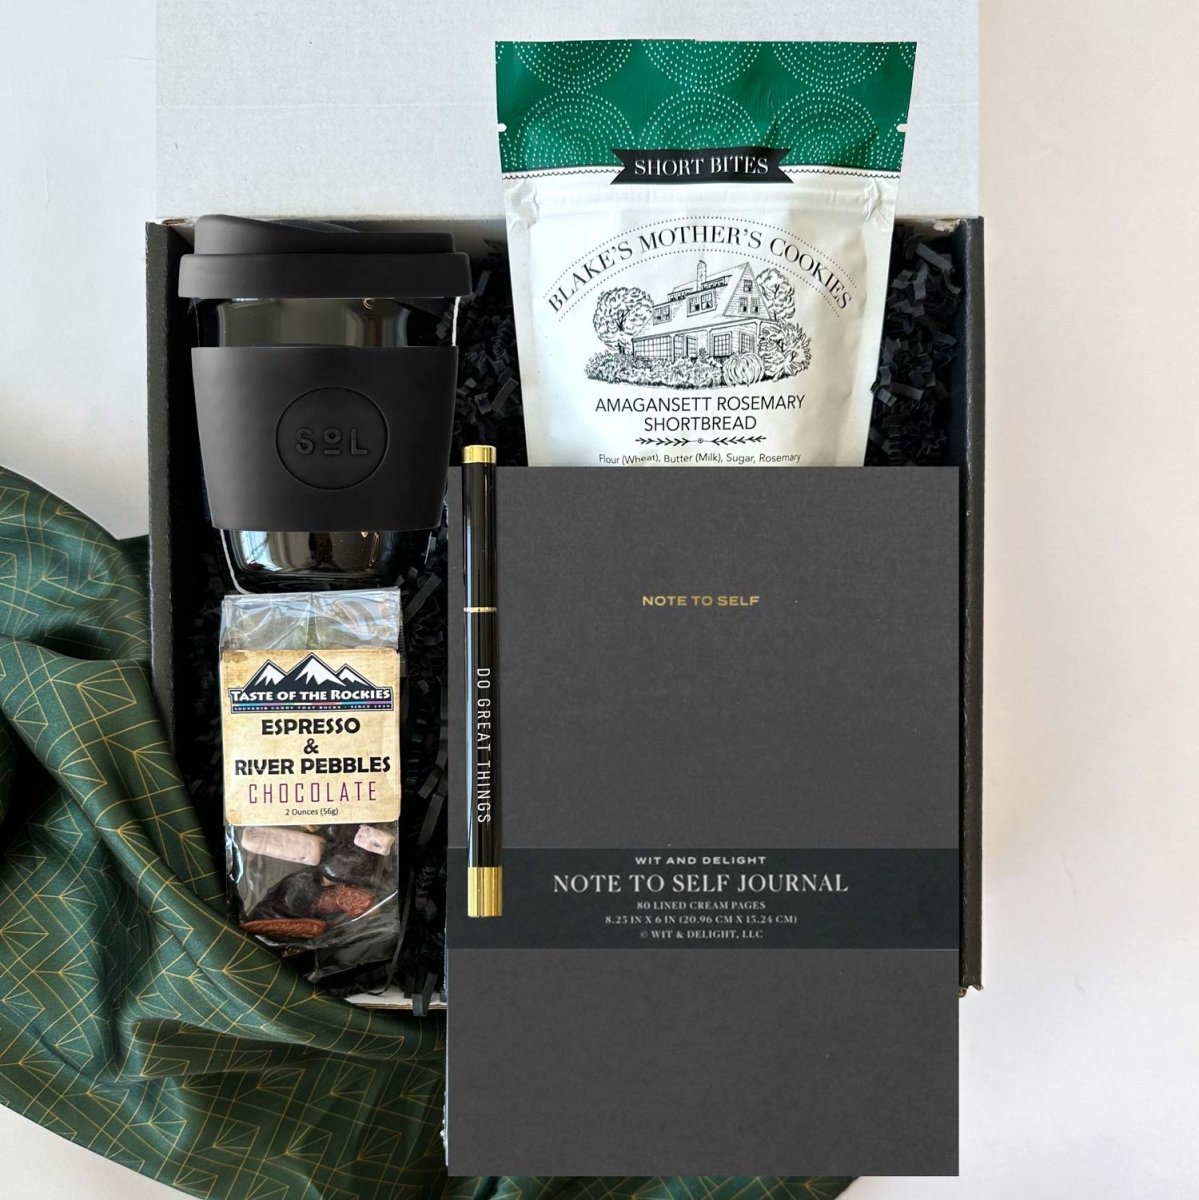 kadoo do great things gift box with black sol cup, shortbread, black notebook, pen, espresso beans chocolate and more